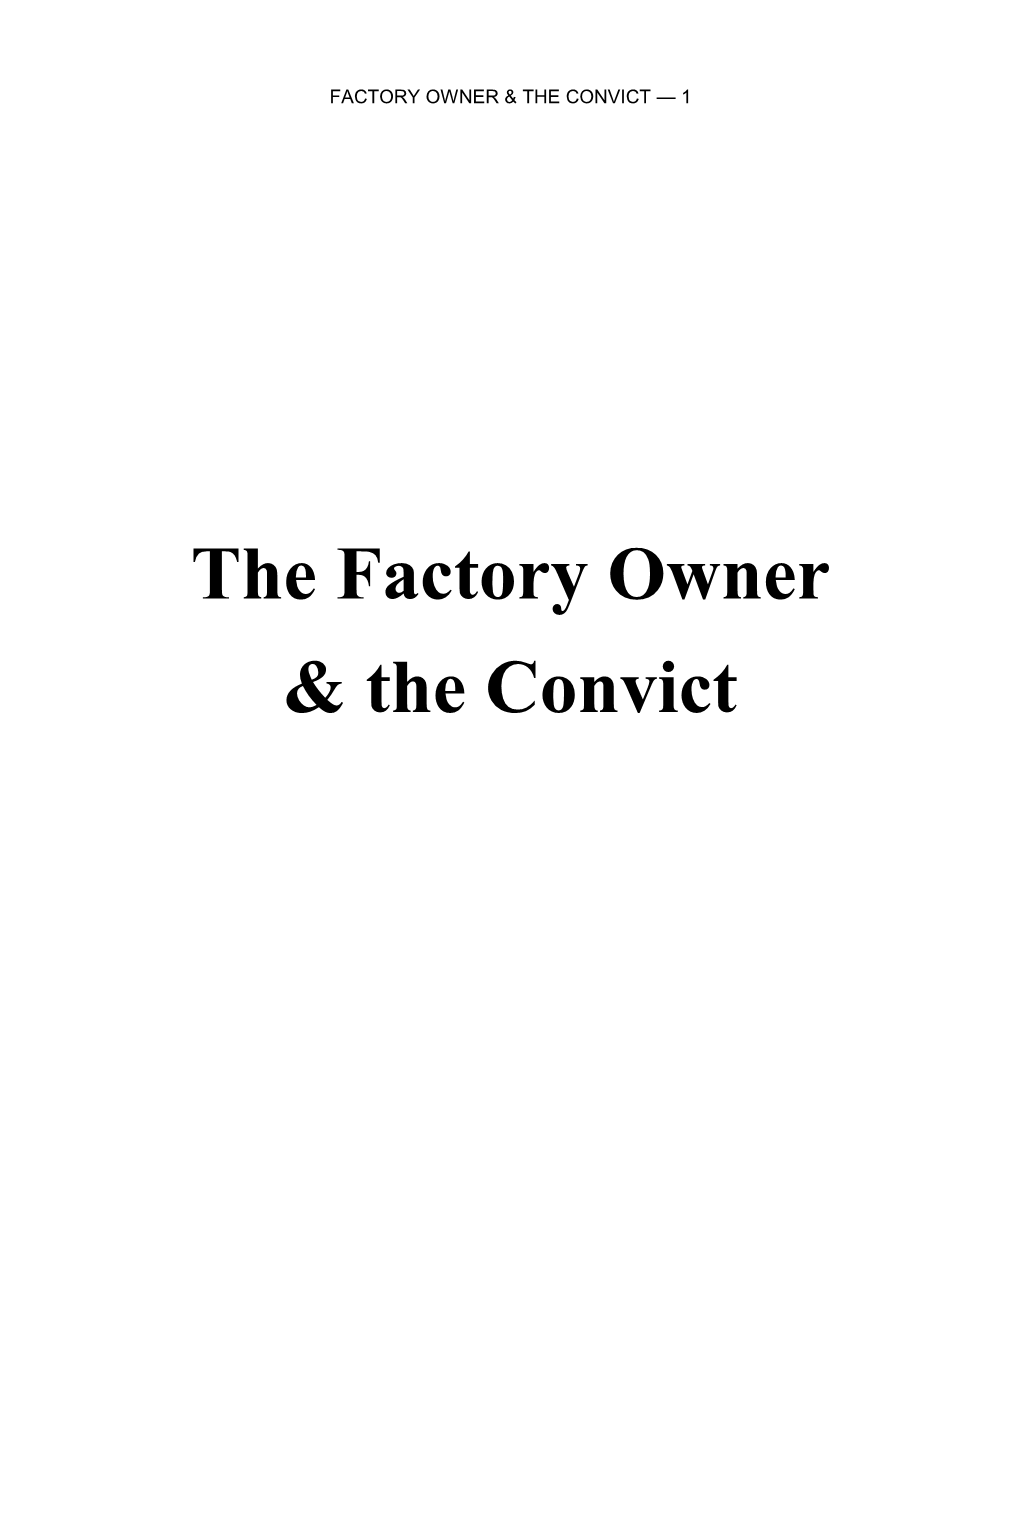 The Factory Owner & the Convict